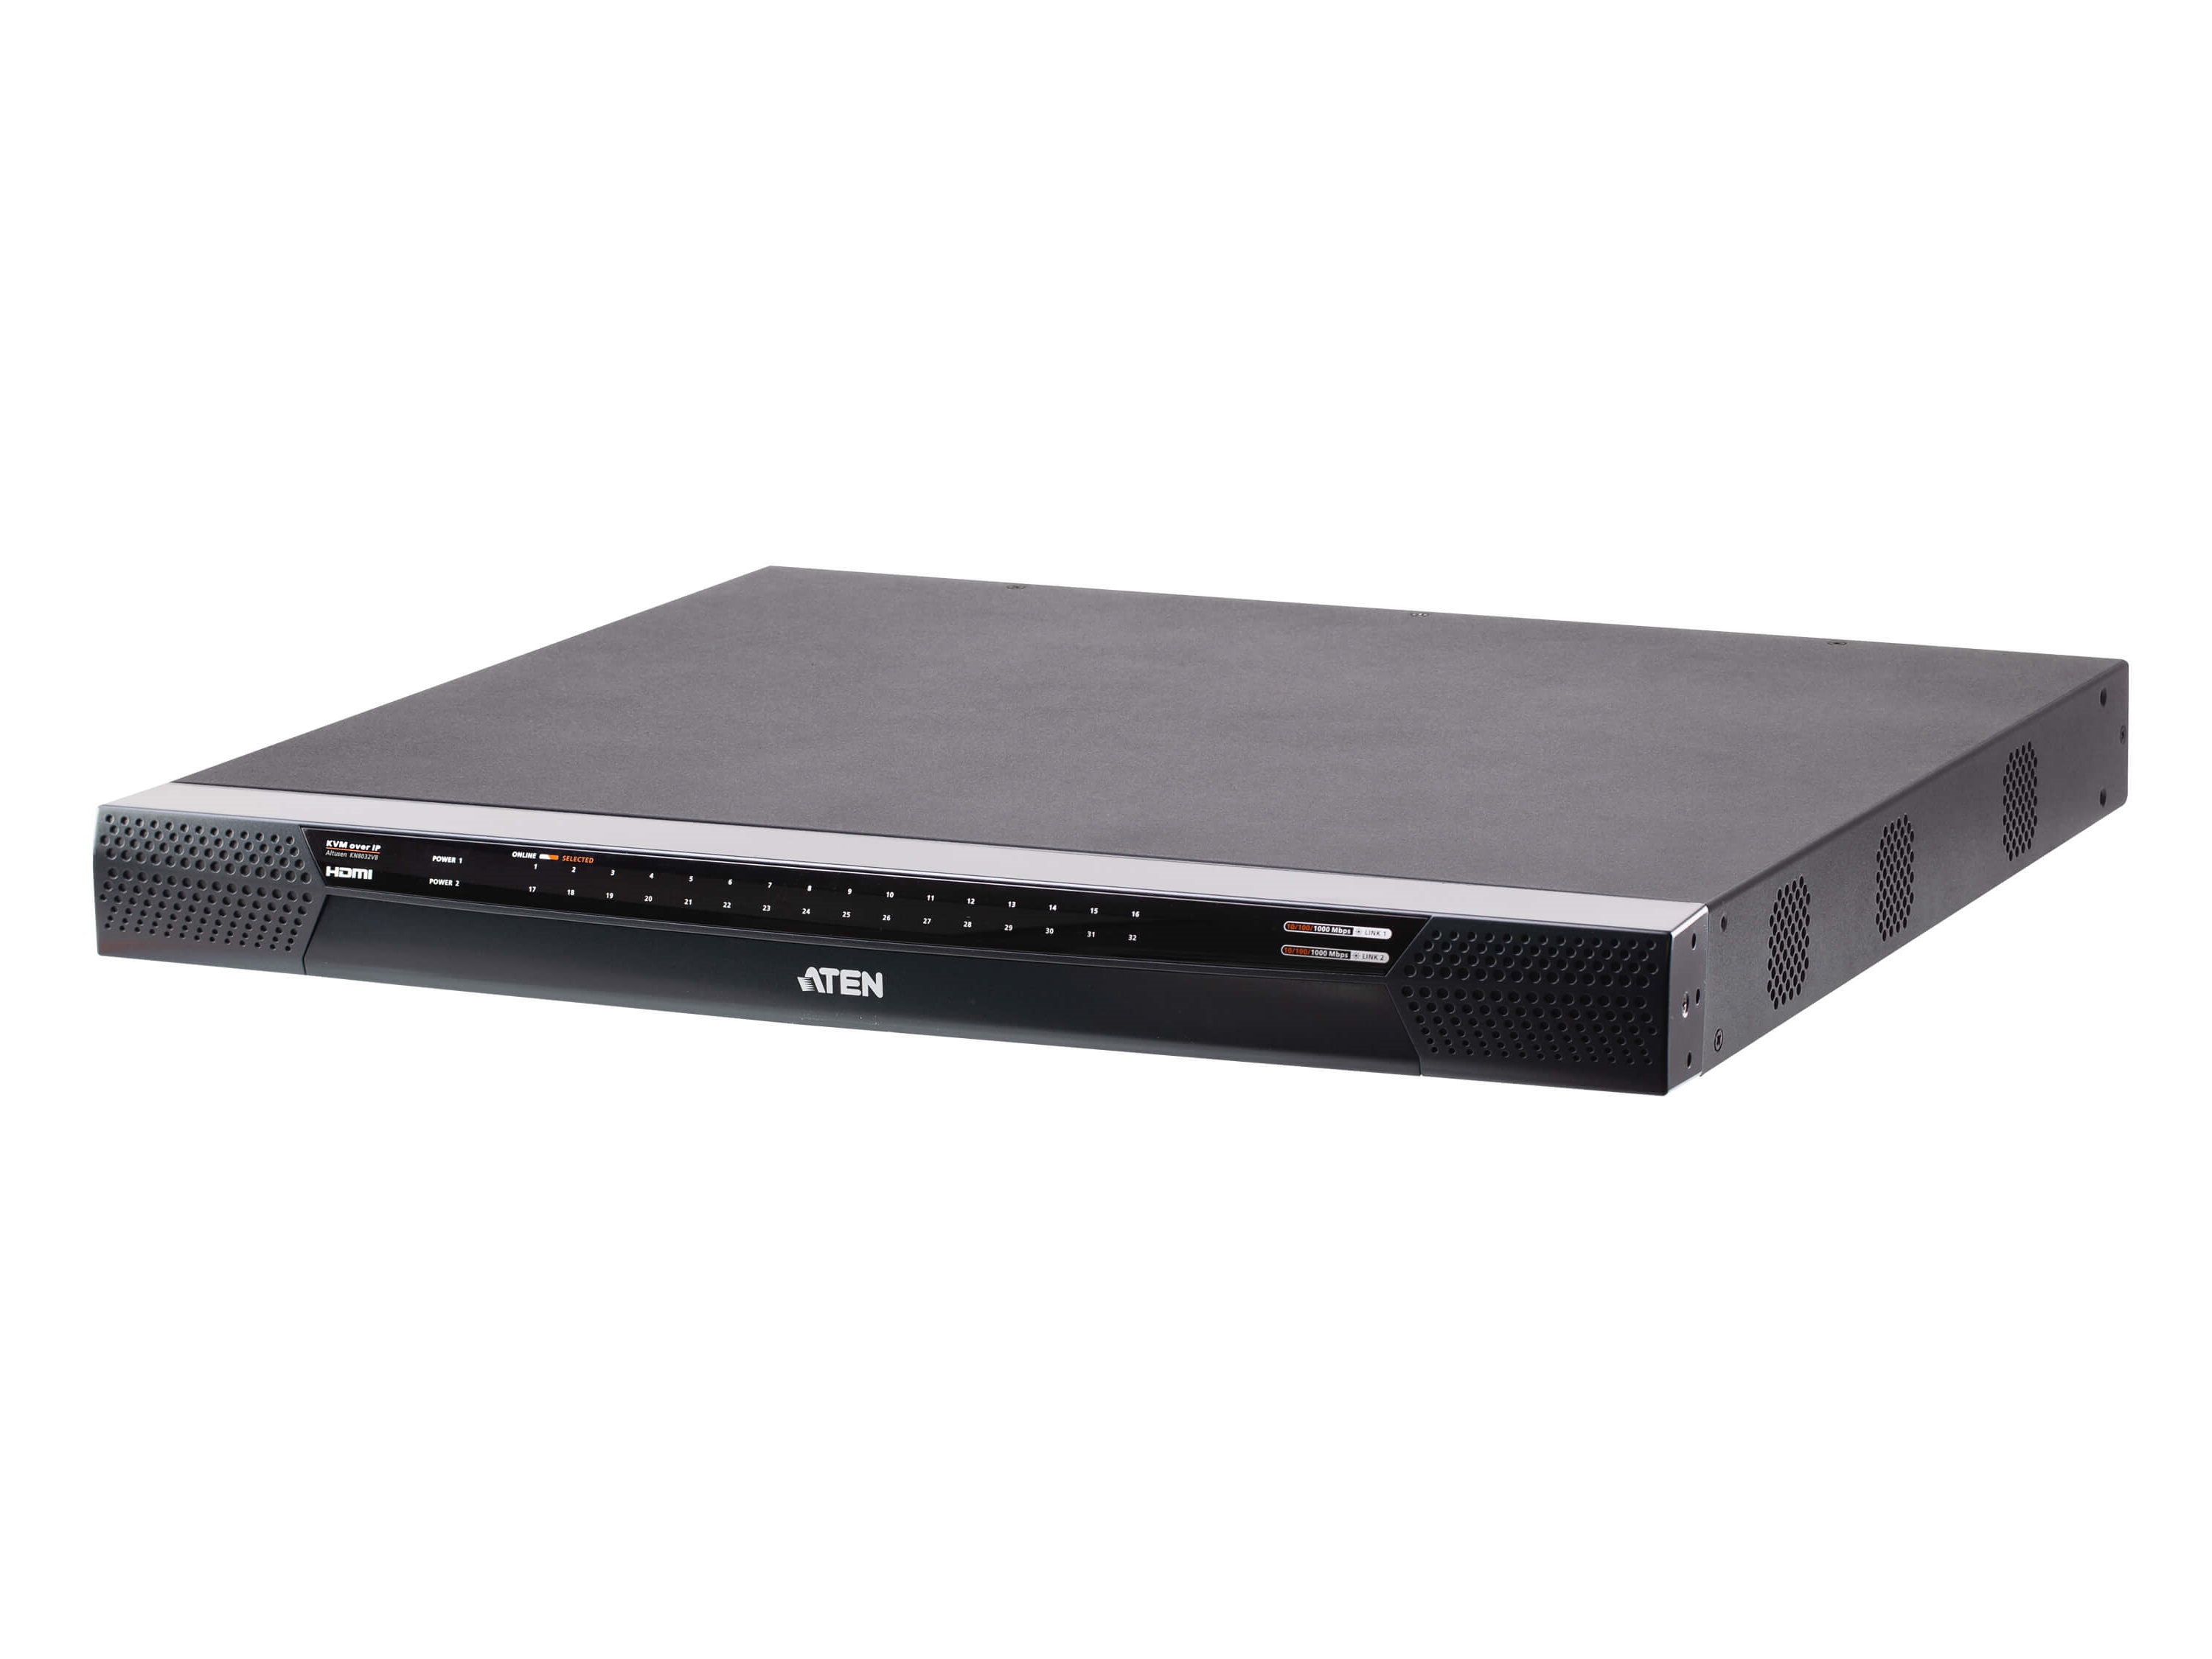 KN8032VB 1-Local/8-Remote Shared Access 32-Port Multi-Interface Cat 5 KVM over IP Switch by Aten